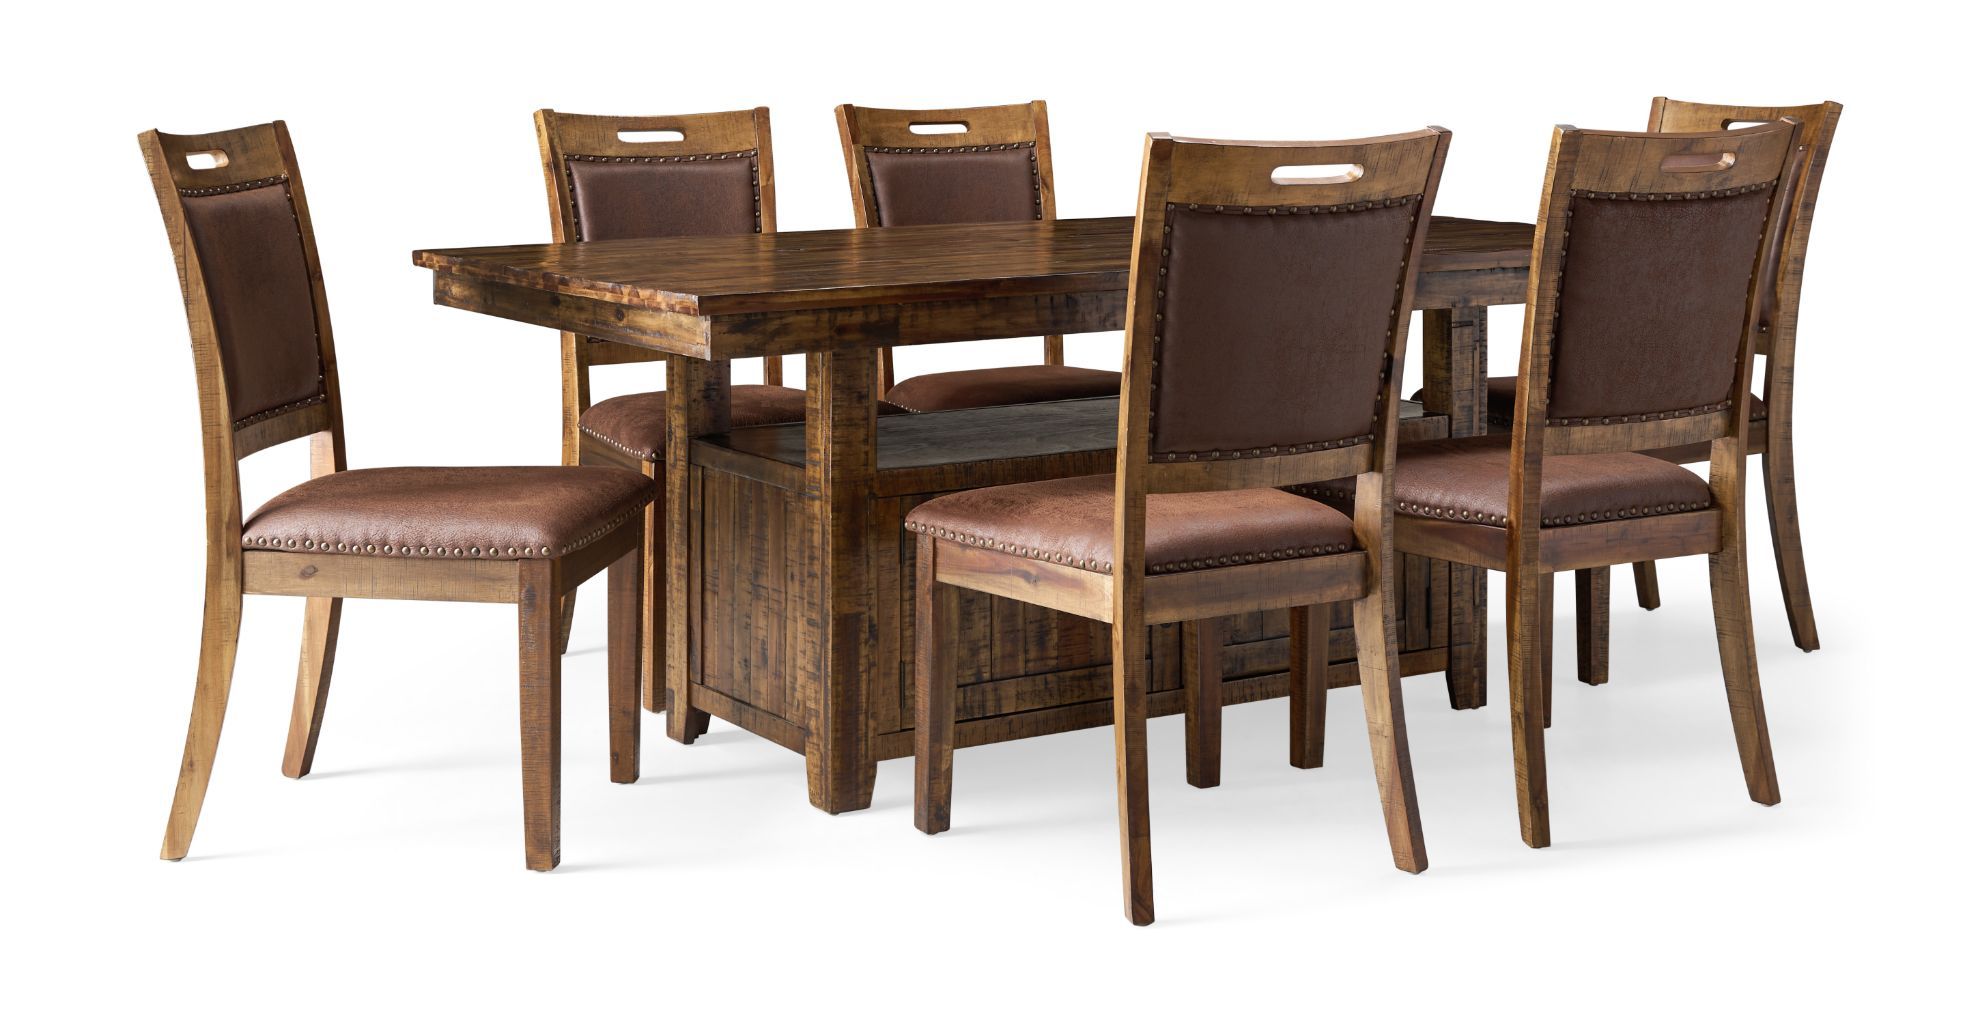 Cannon Valley 7pc Convertible Dining Set